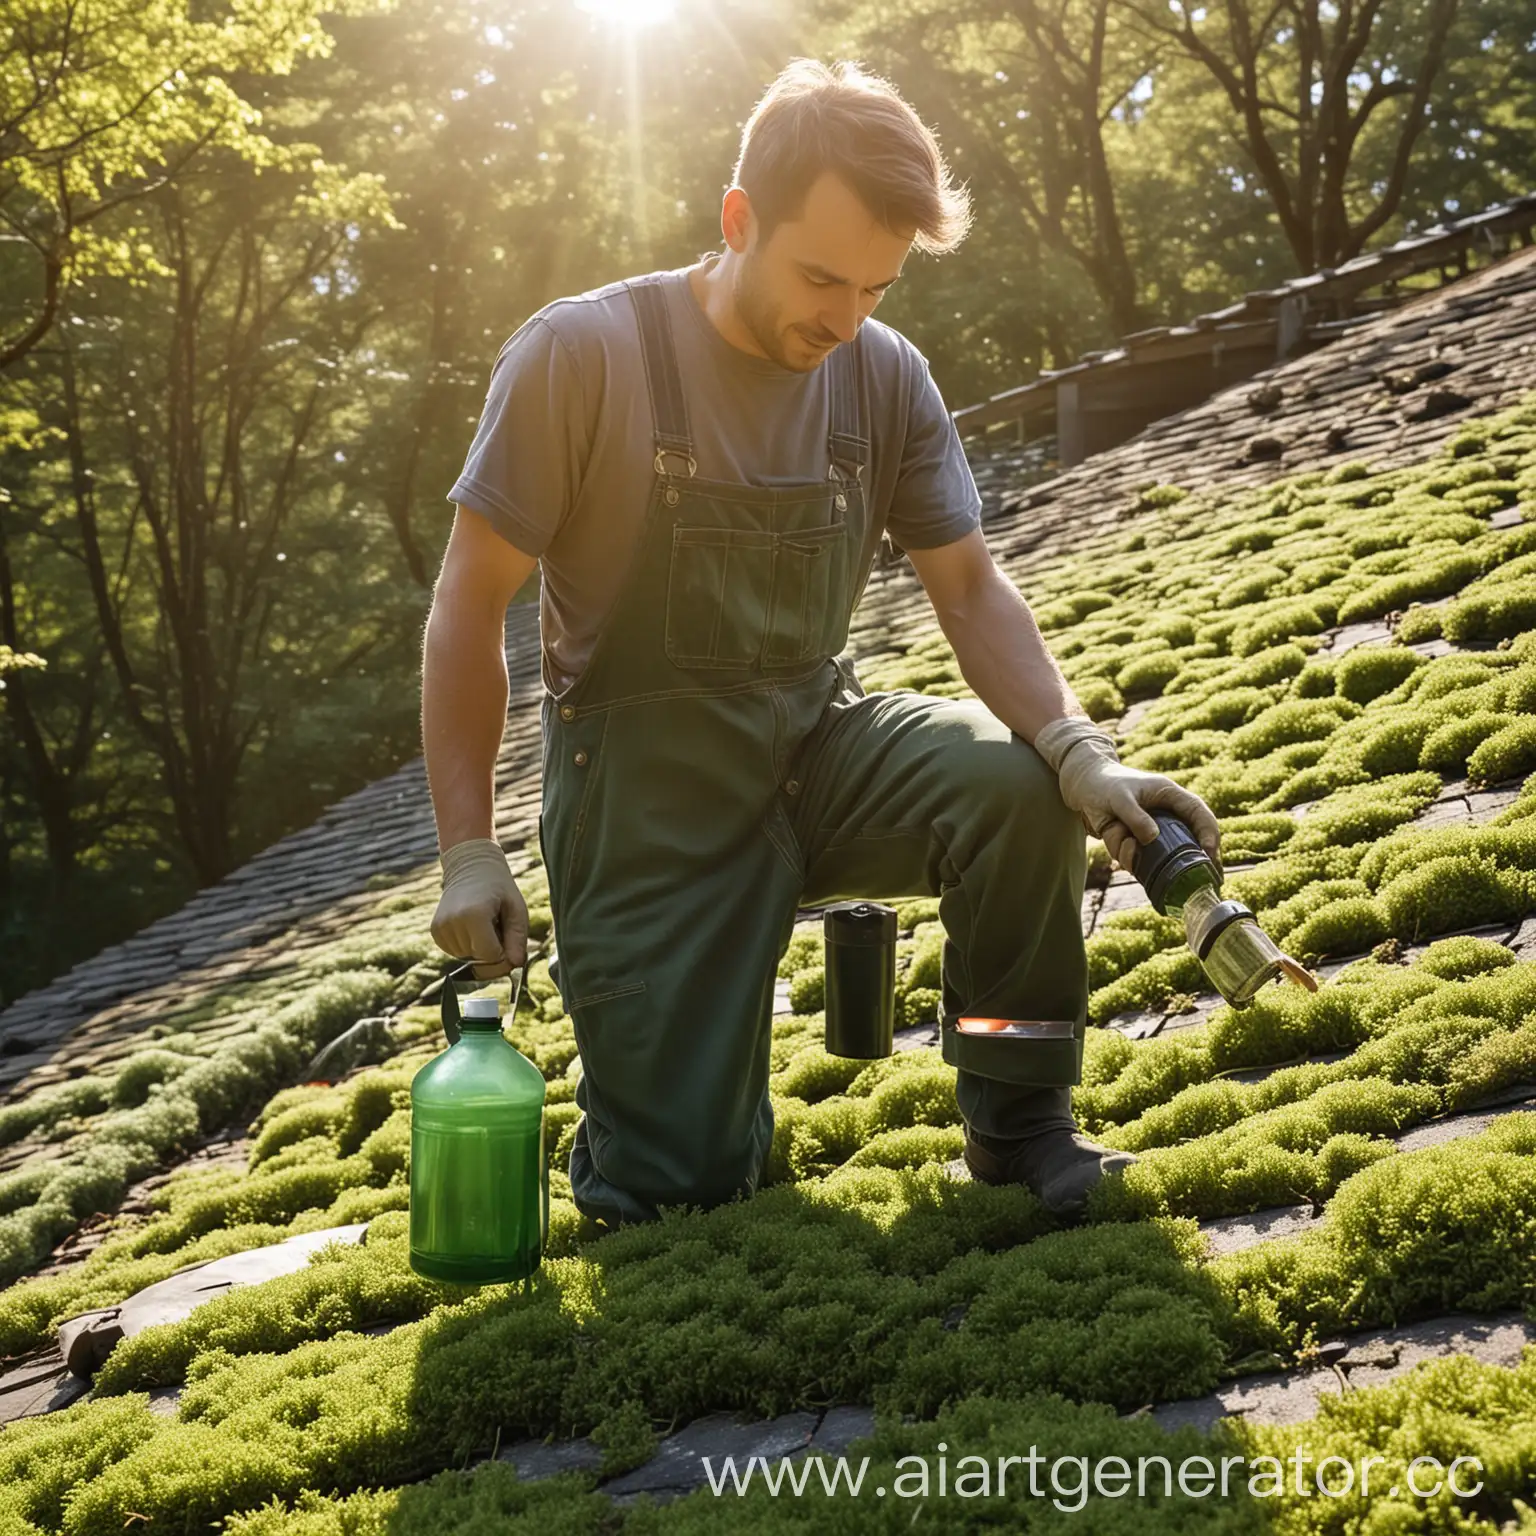 The master cleans the roof of moss, the day is sunny, he is in overalls with tools on his hands, there is a spray bottle with funds nearby